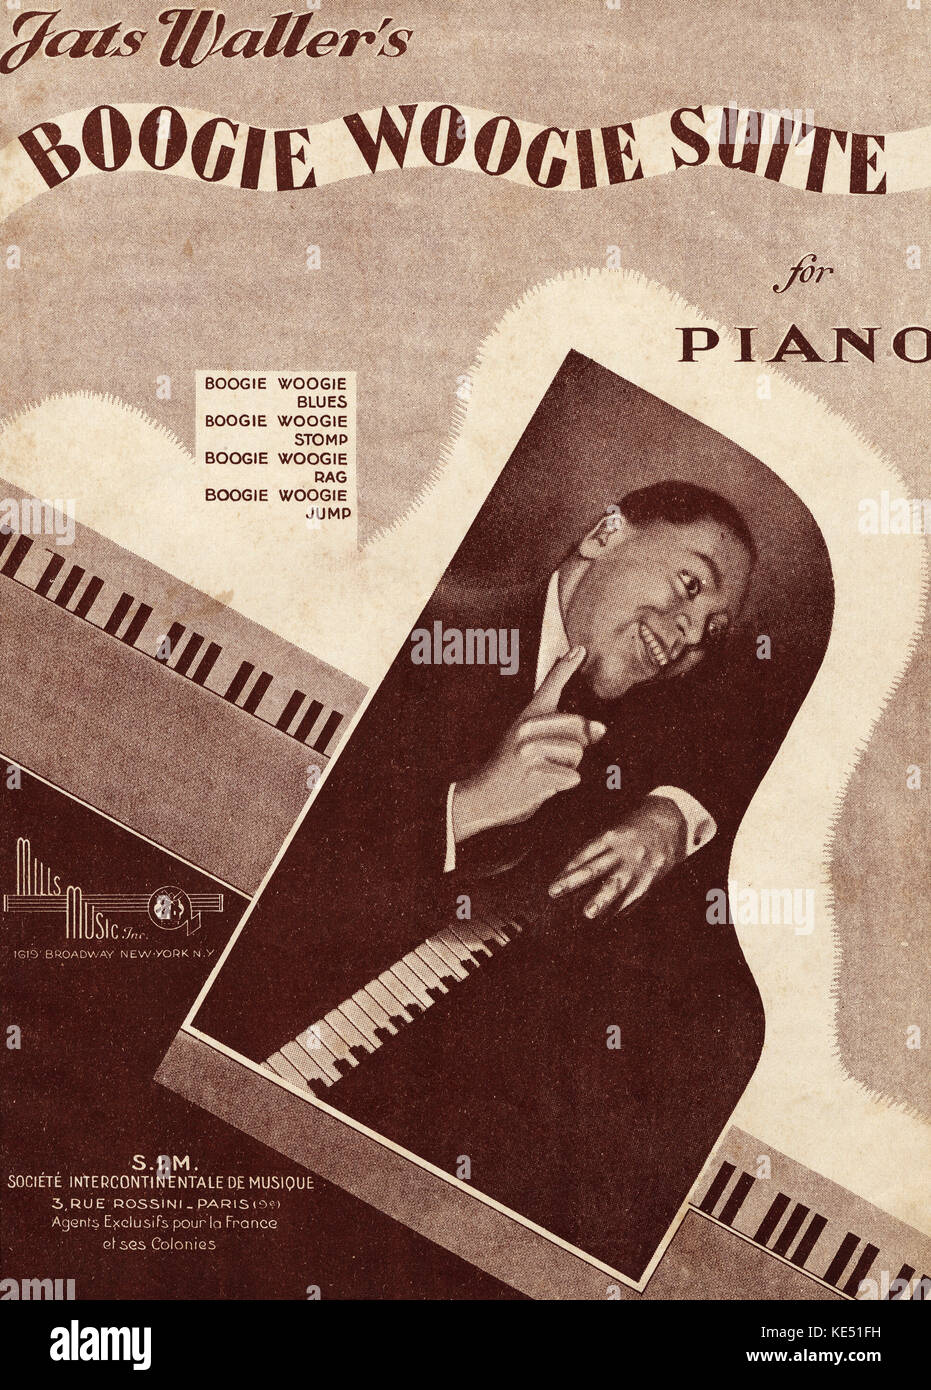 'Boogie Woogie Suite' - piano music by Fats Waller, 1945. Score cover. FW (born Thomas Wright Waller), American jazz pianist:  21 May 1904 - 15 December 1943. Stock Photo